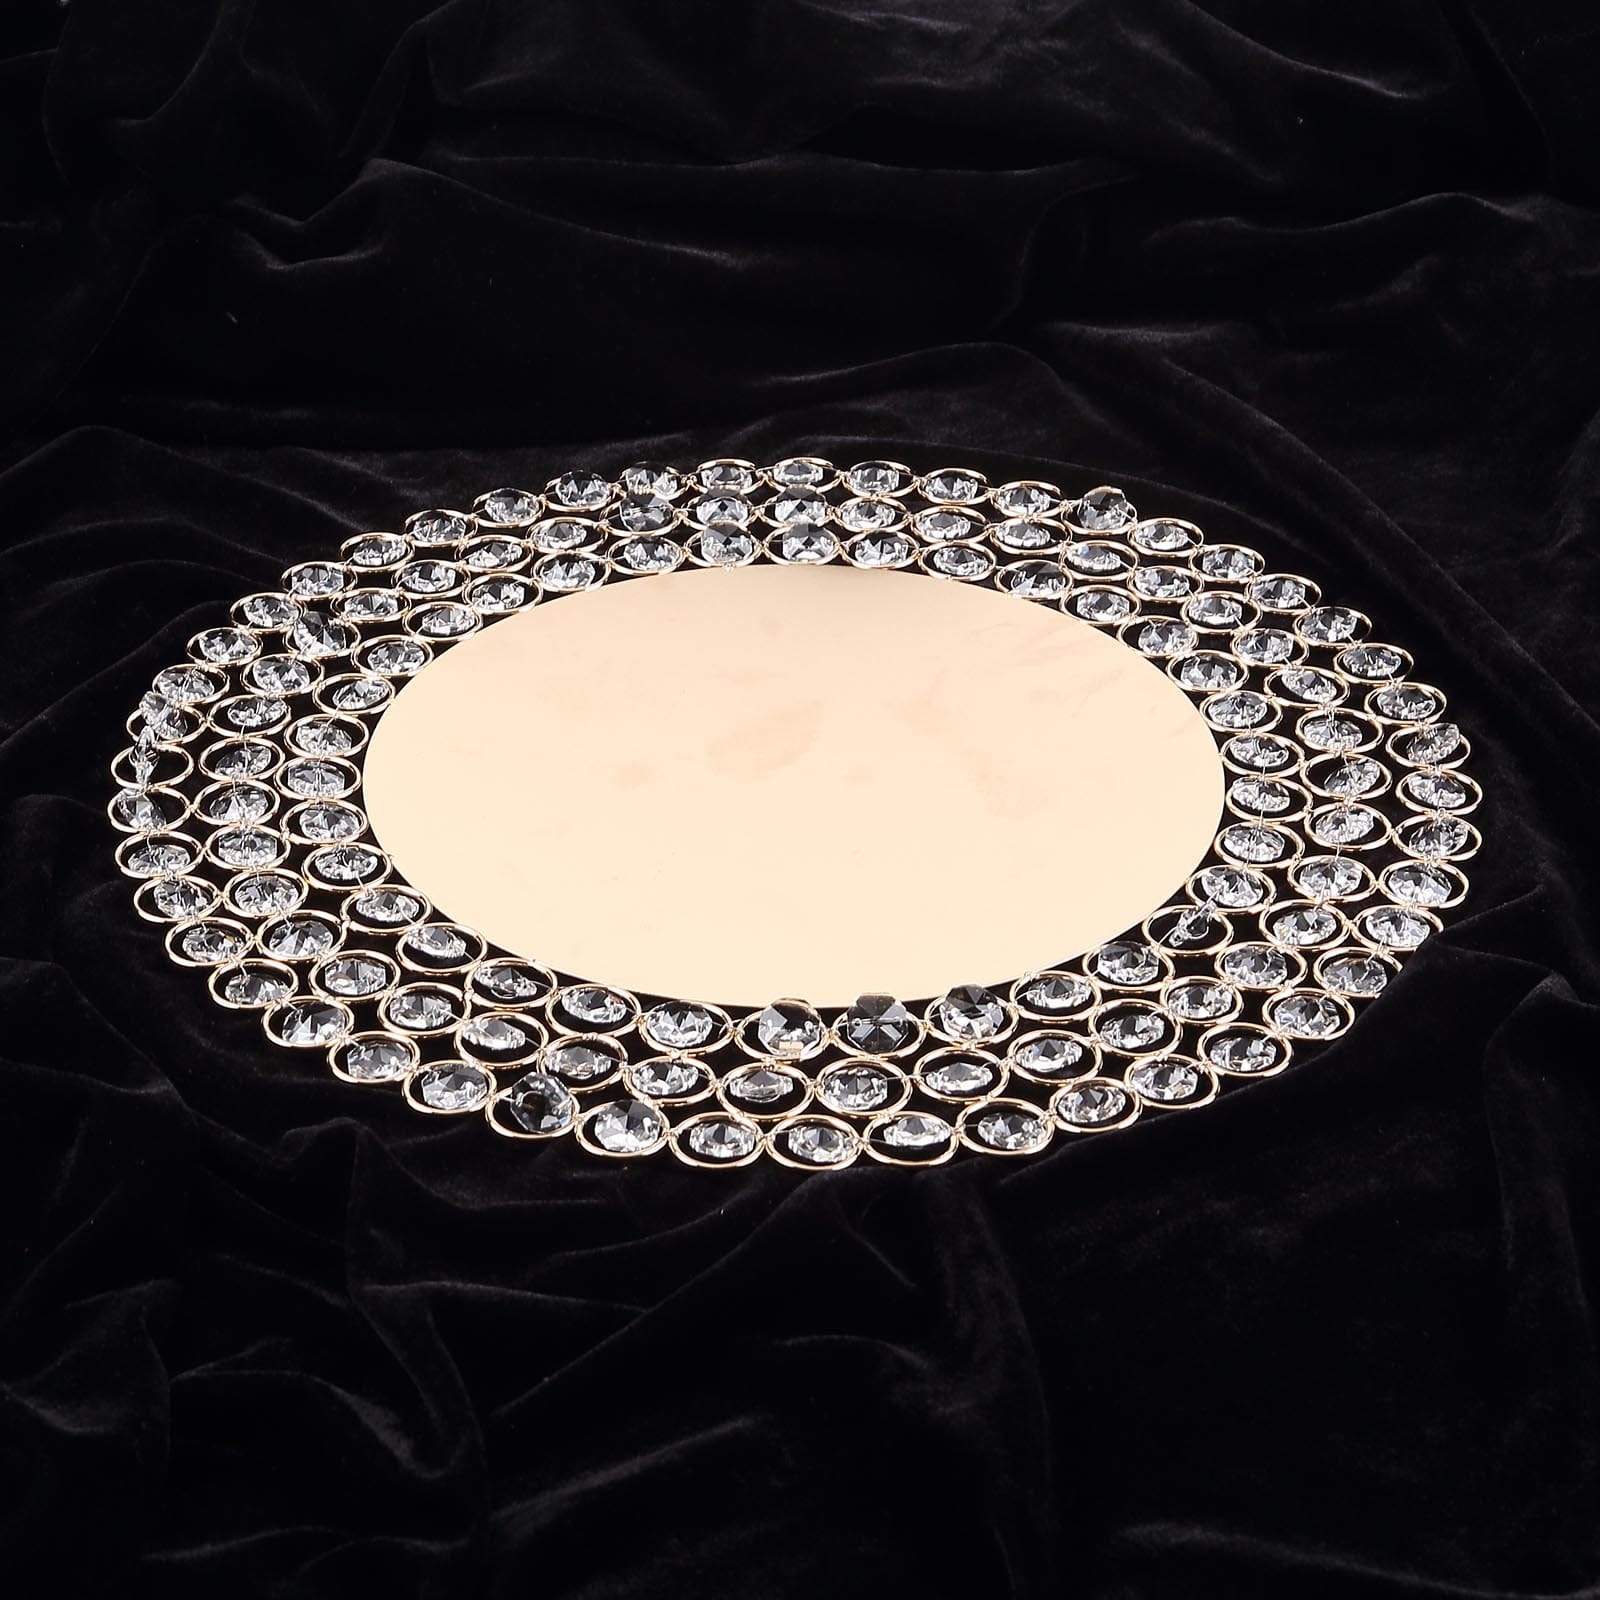 14 in Round Metal Charger Plates with Crystal Beads